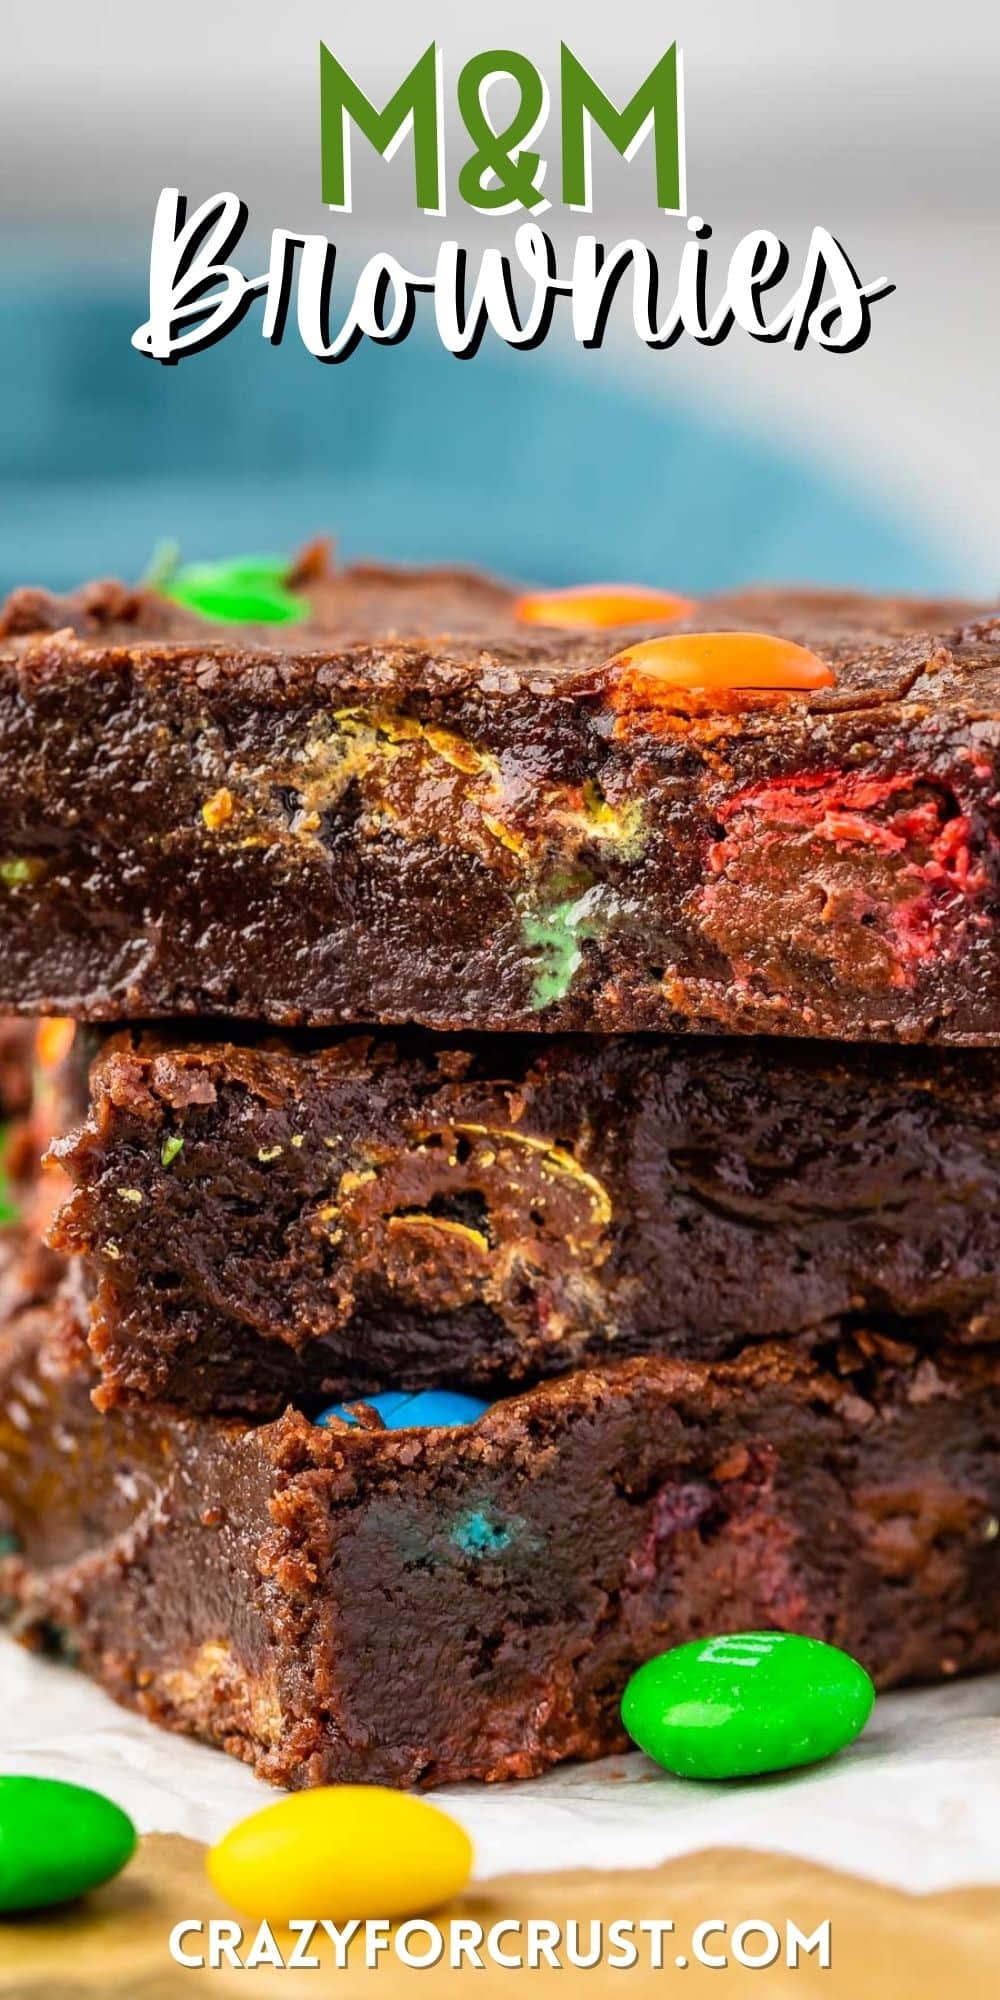 Extra Fudgy M&M Cocoa Brownies